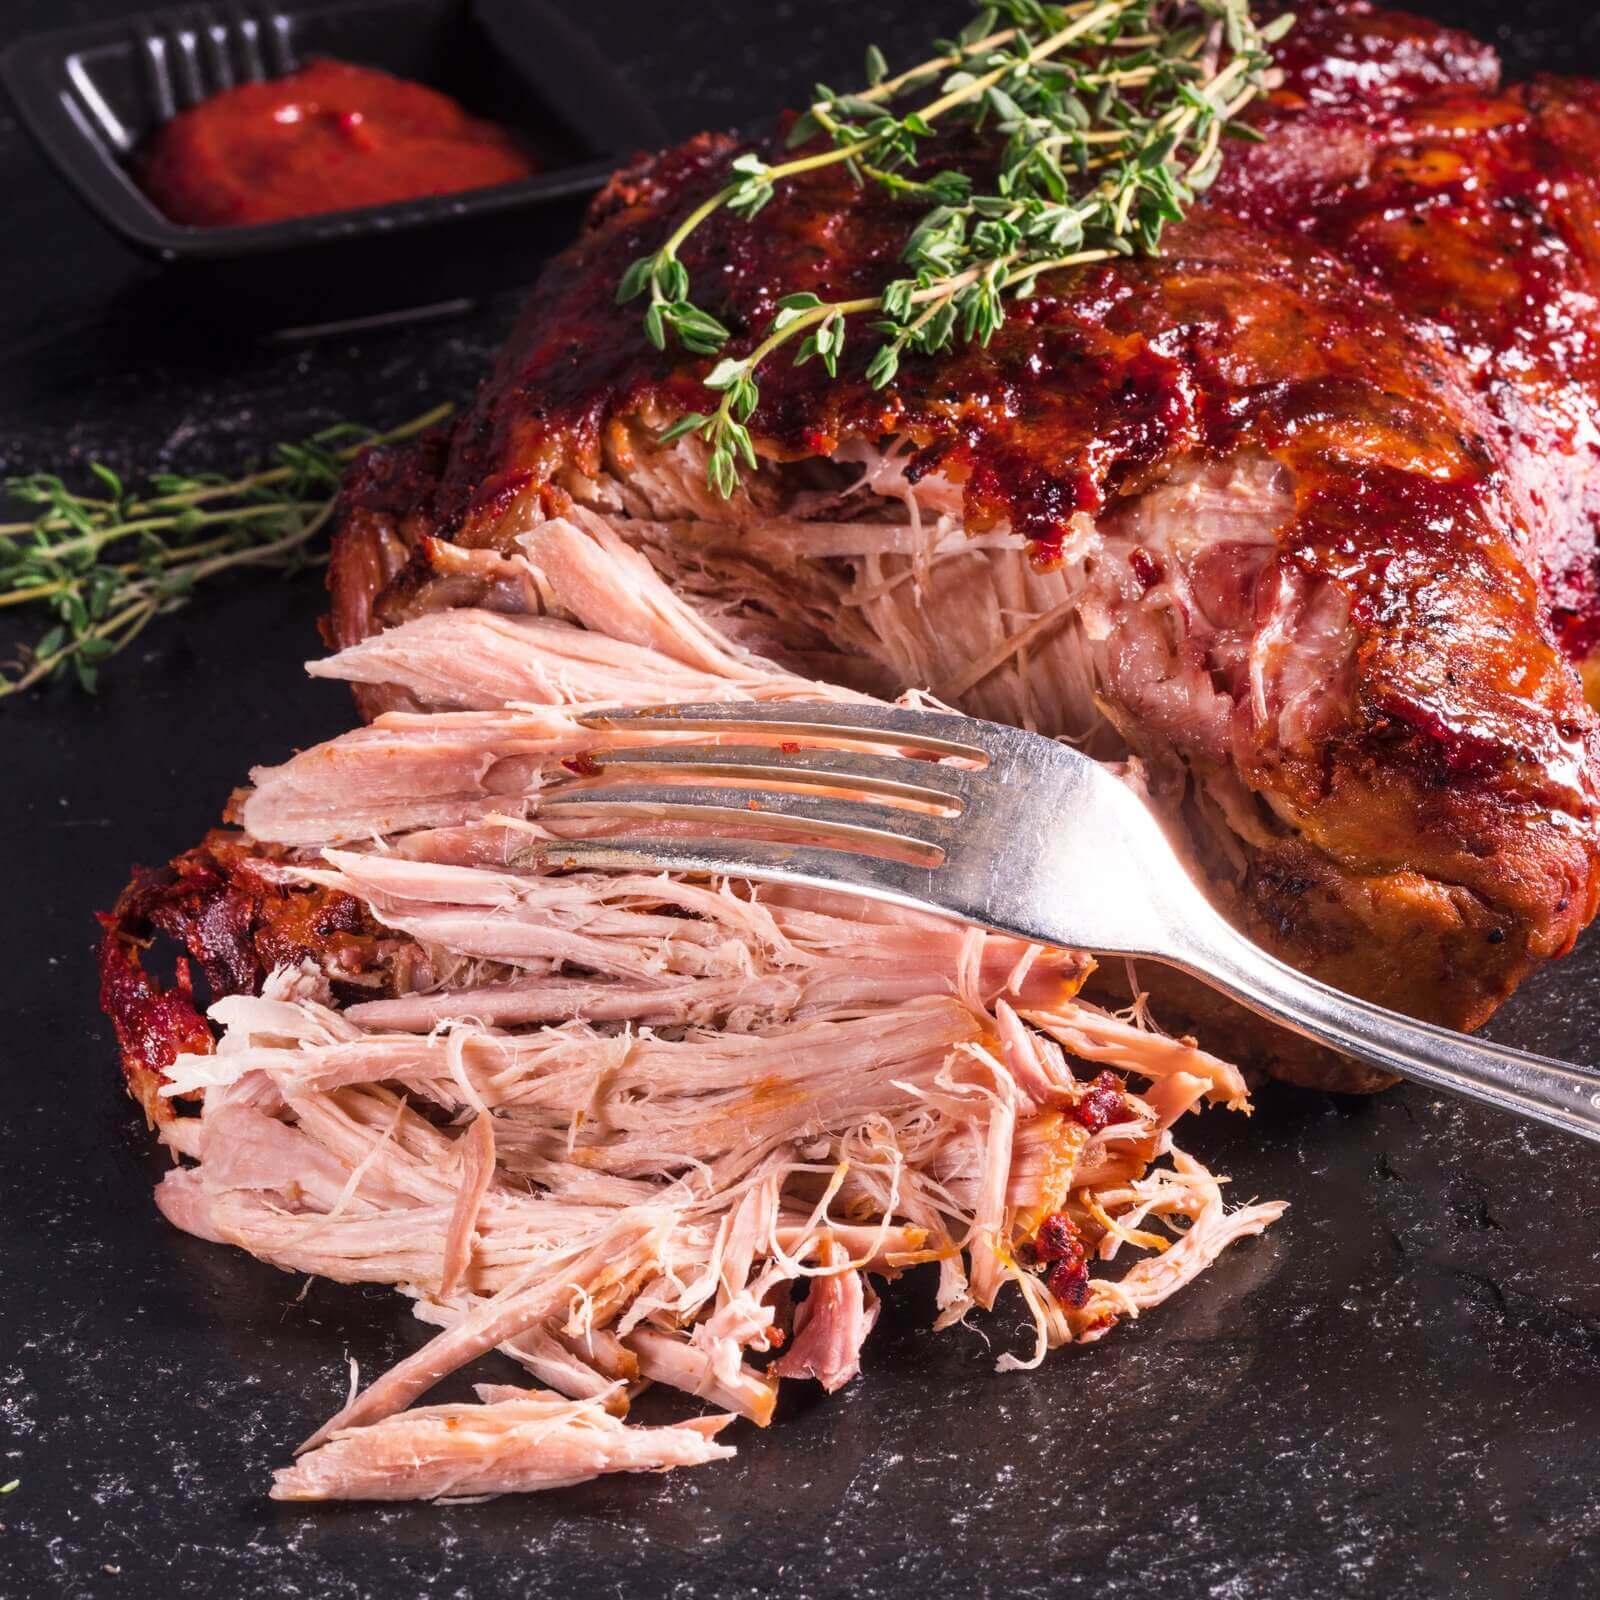 Can You Make Pulled Pork with Pork Chops?